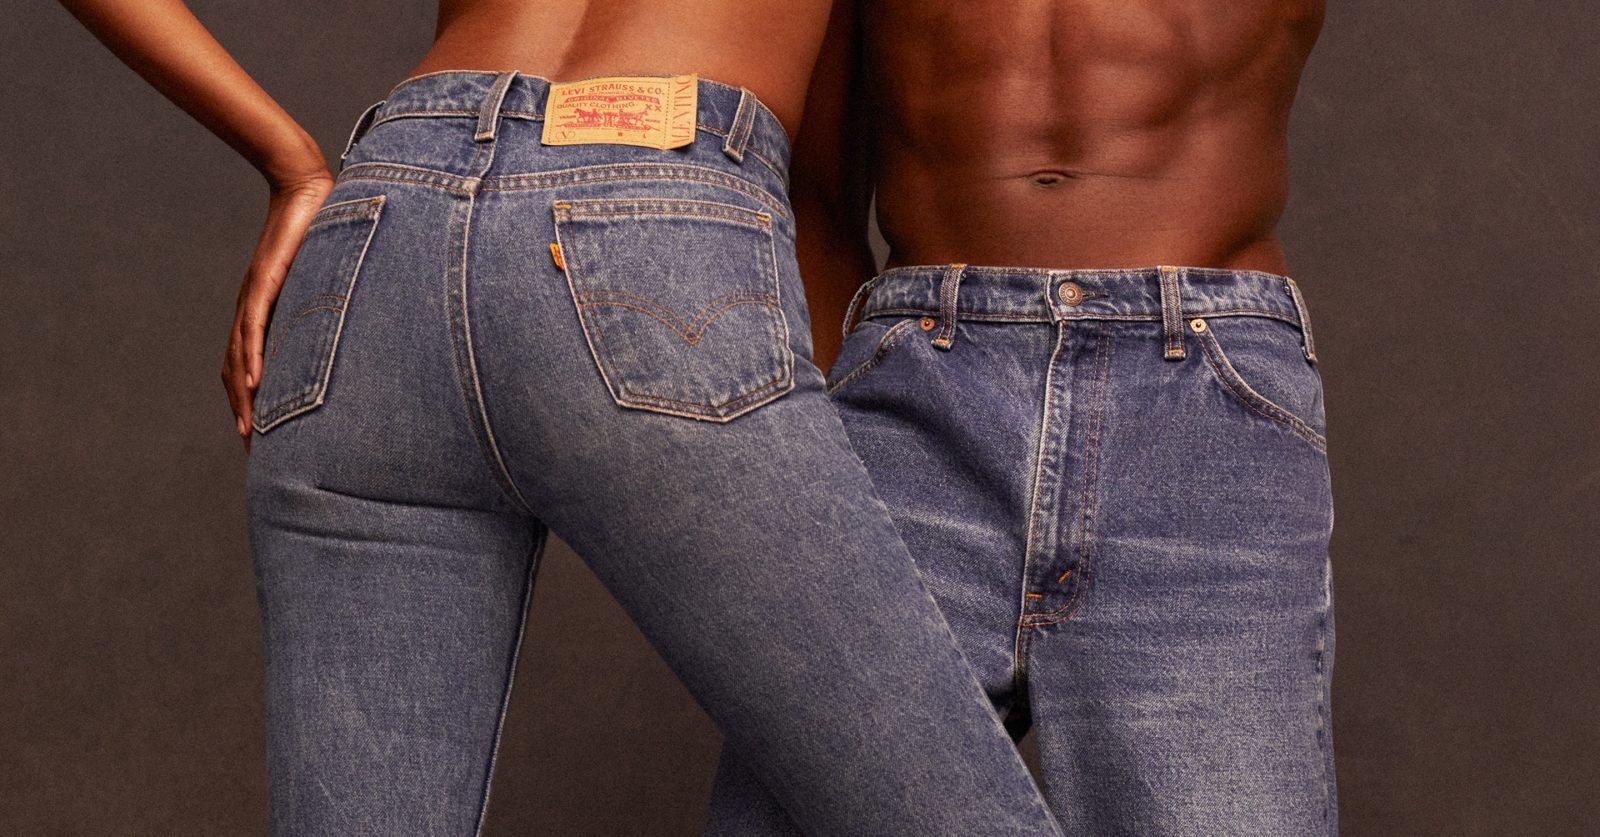 Levi's jeans are back in style thanks to Valentino, Miu Miu and more